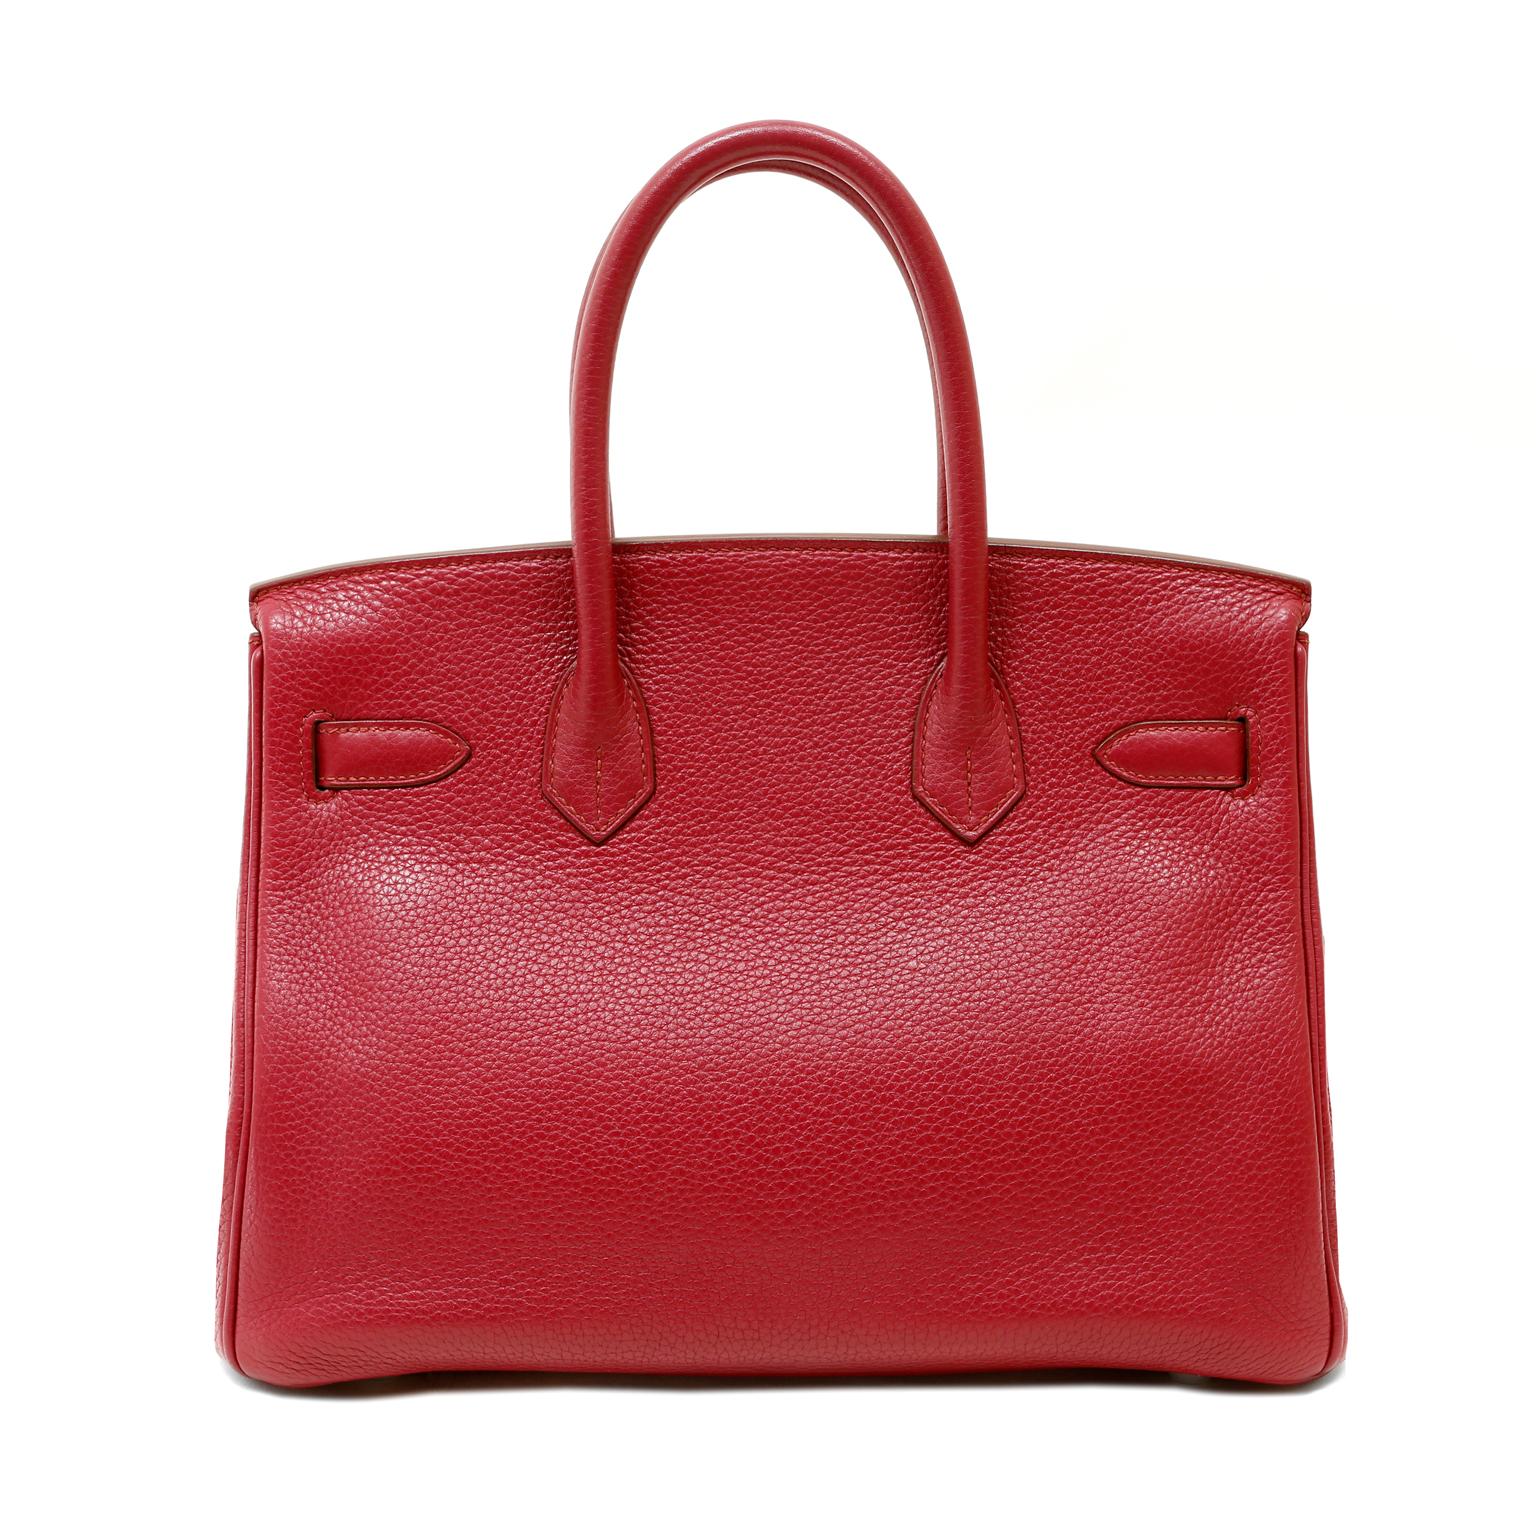 This authentic Hermès Ruby Red Togo 30 cm Birkin is in excellent condition. The handstitched Birkin is harder than ever to acquire, especially in the coveted 30 cm silhouette.
Lipstick red Togo leather is textured and soft to the hand.  It is the